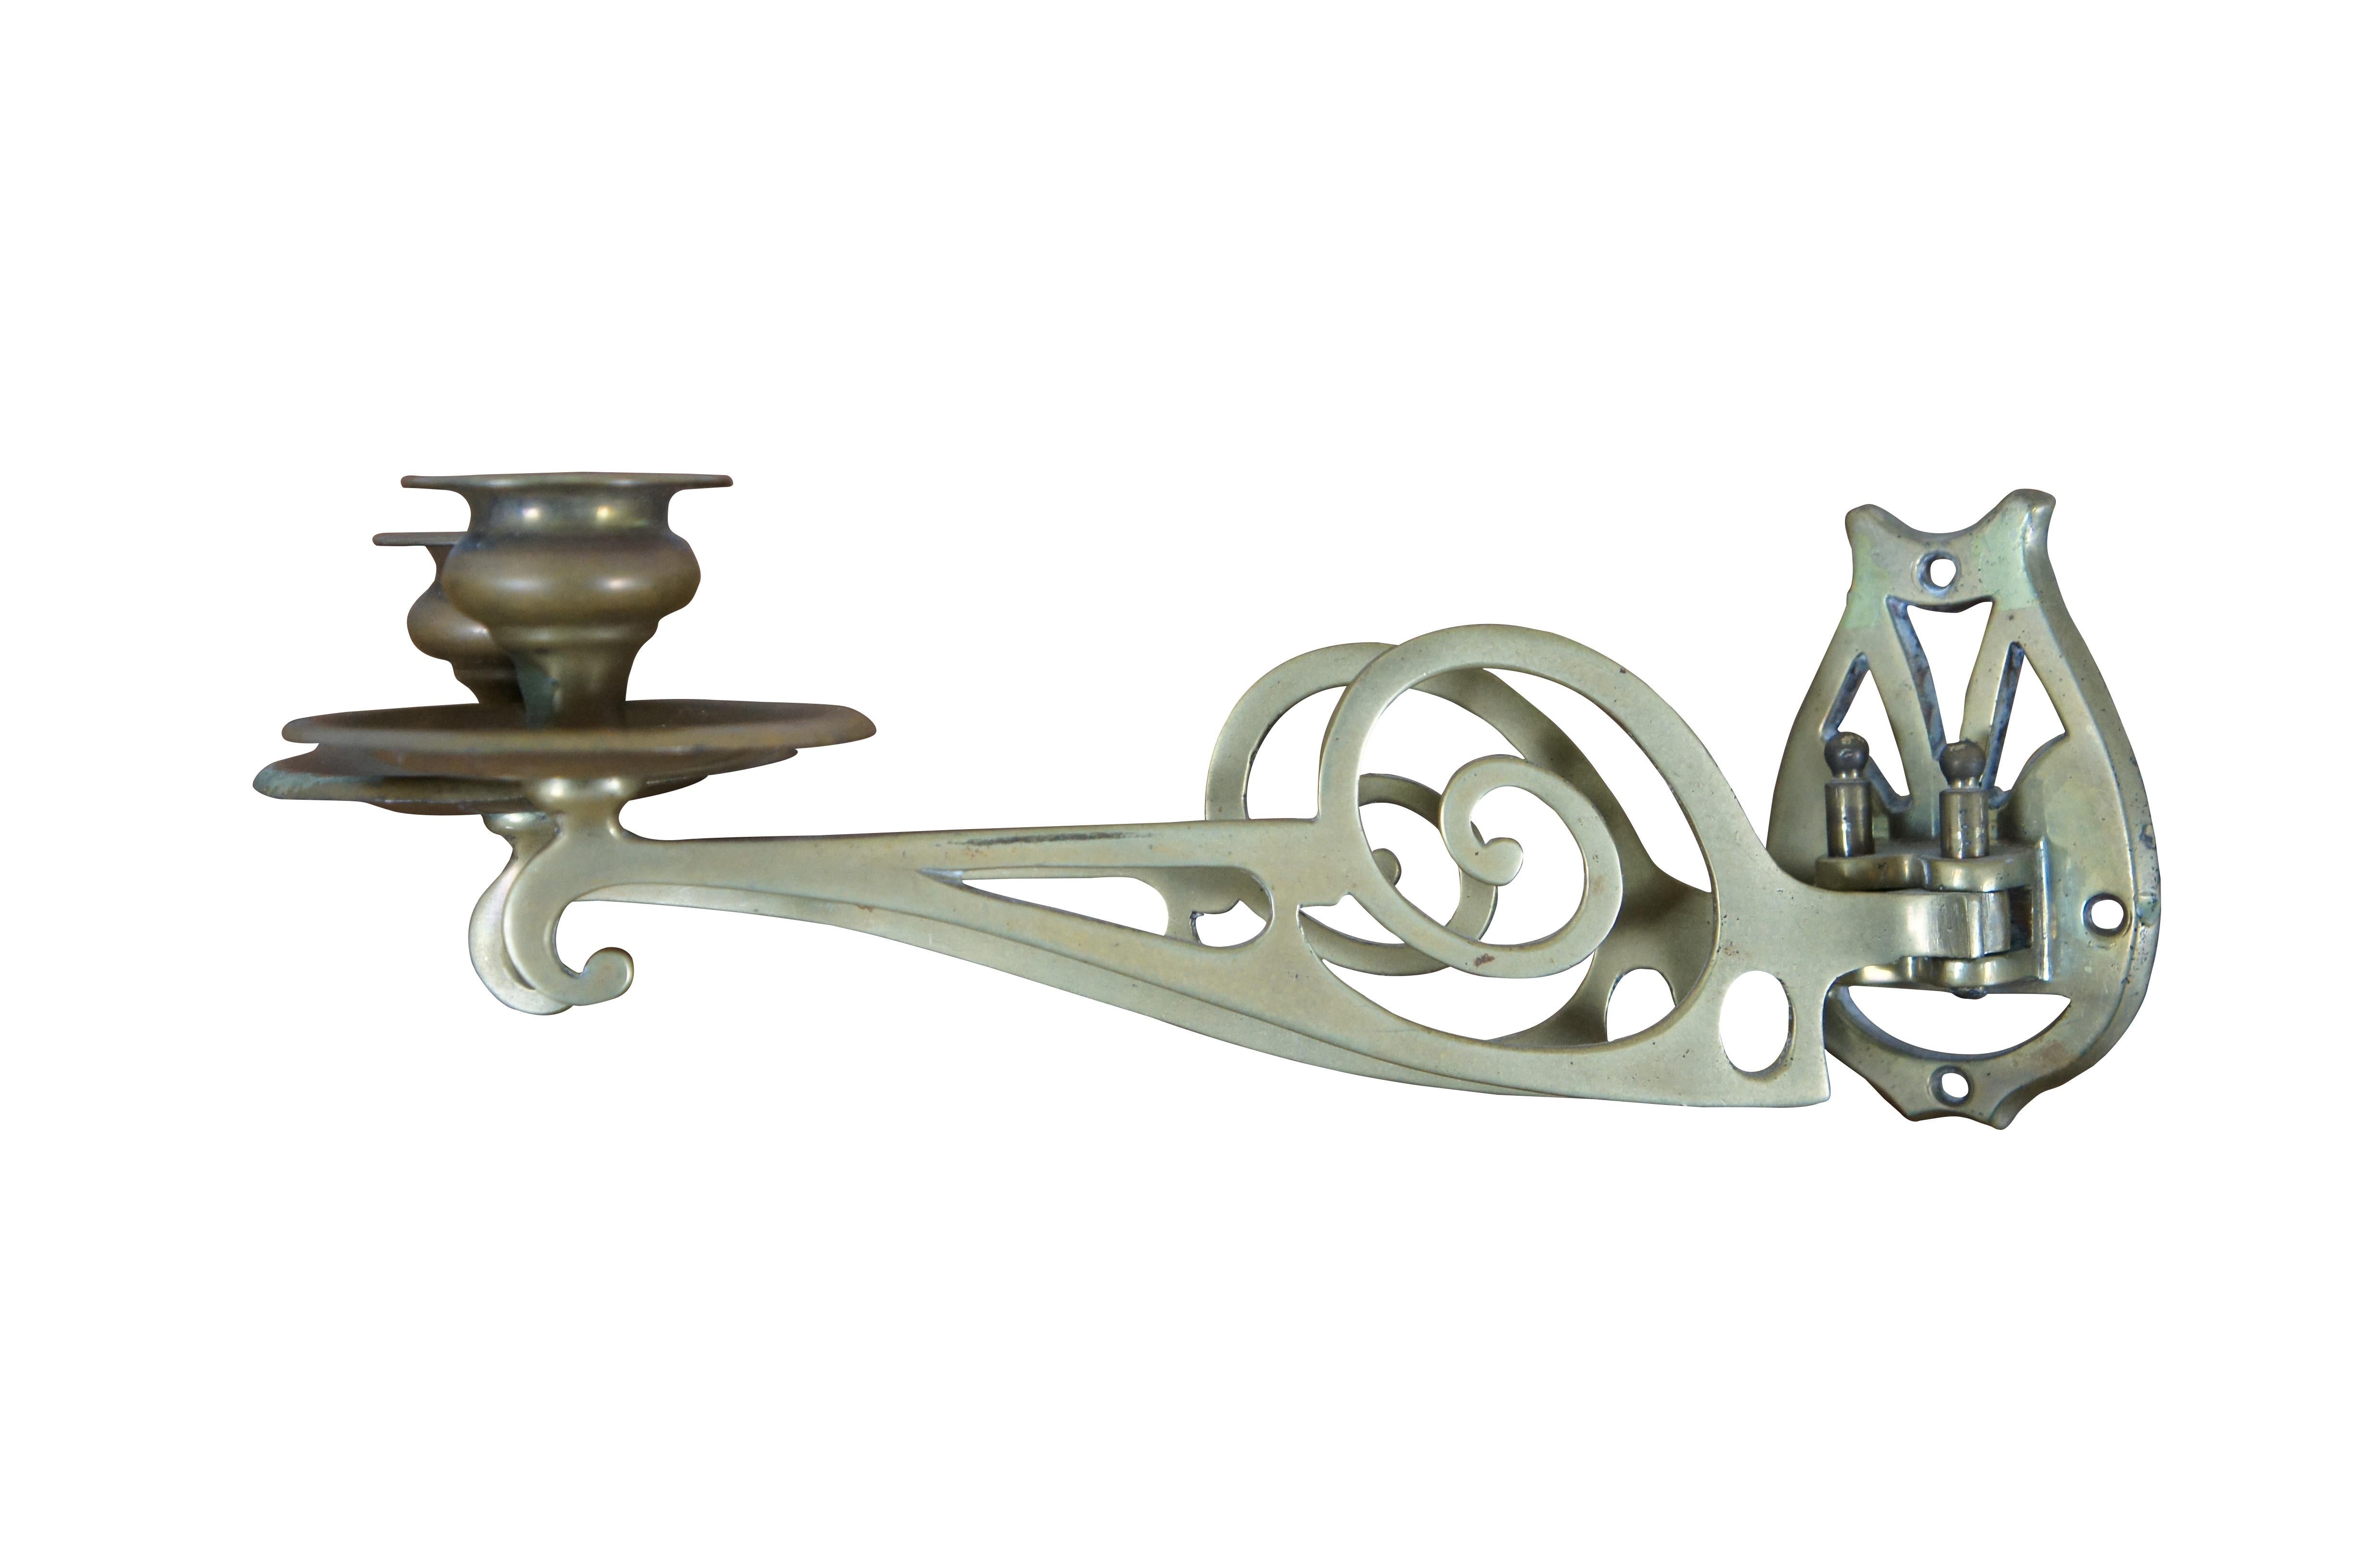 Antique Victorian brass two arm piano candle / candelabra wall sconce, featuring a scrolled and pierced design with hinged swing arm.  Easily removable for mobility and cleaning.


DIMENSIONS

15.25